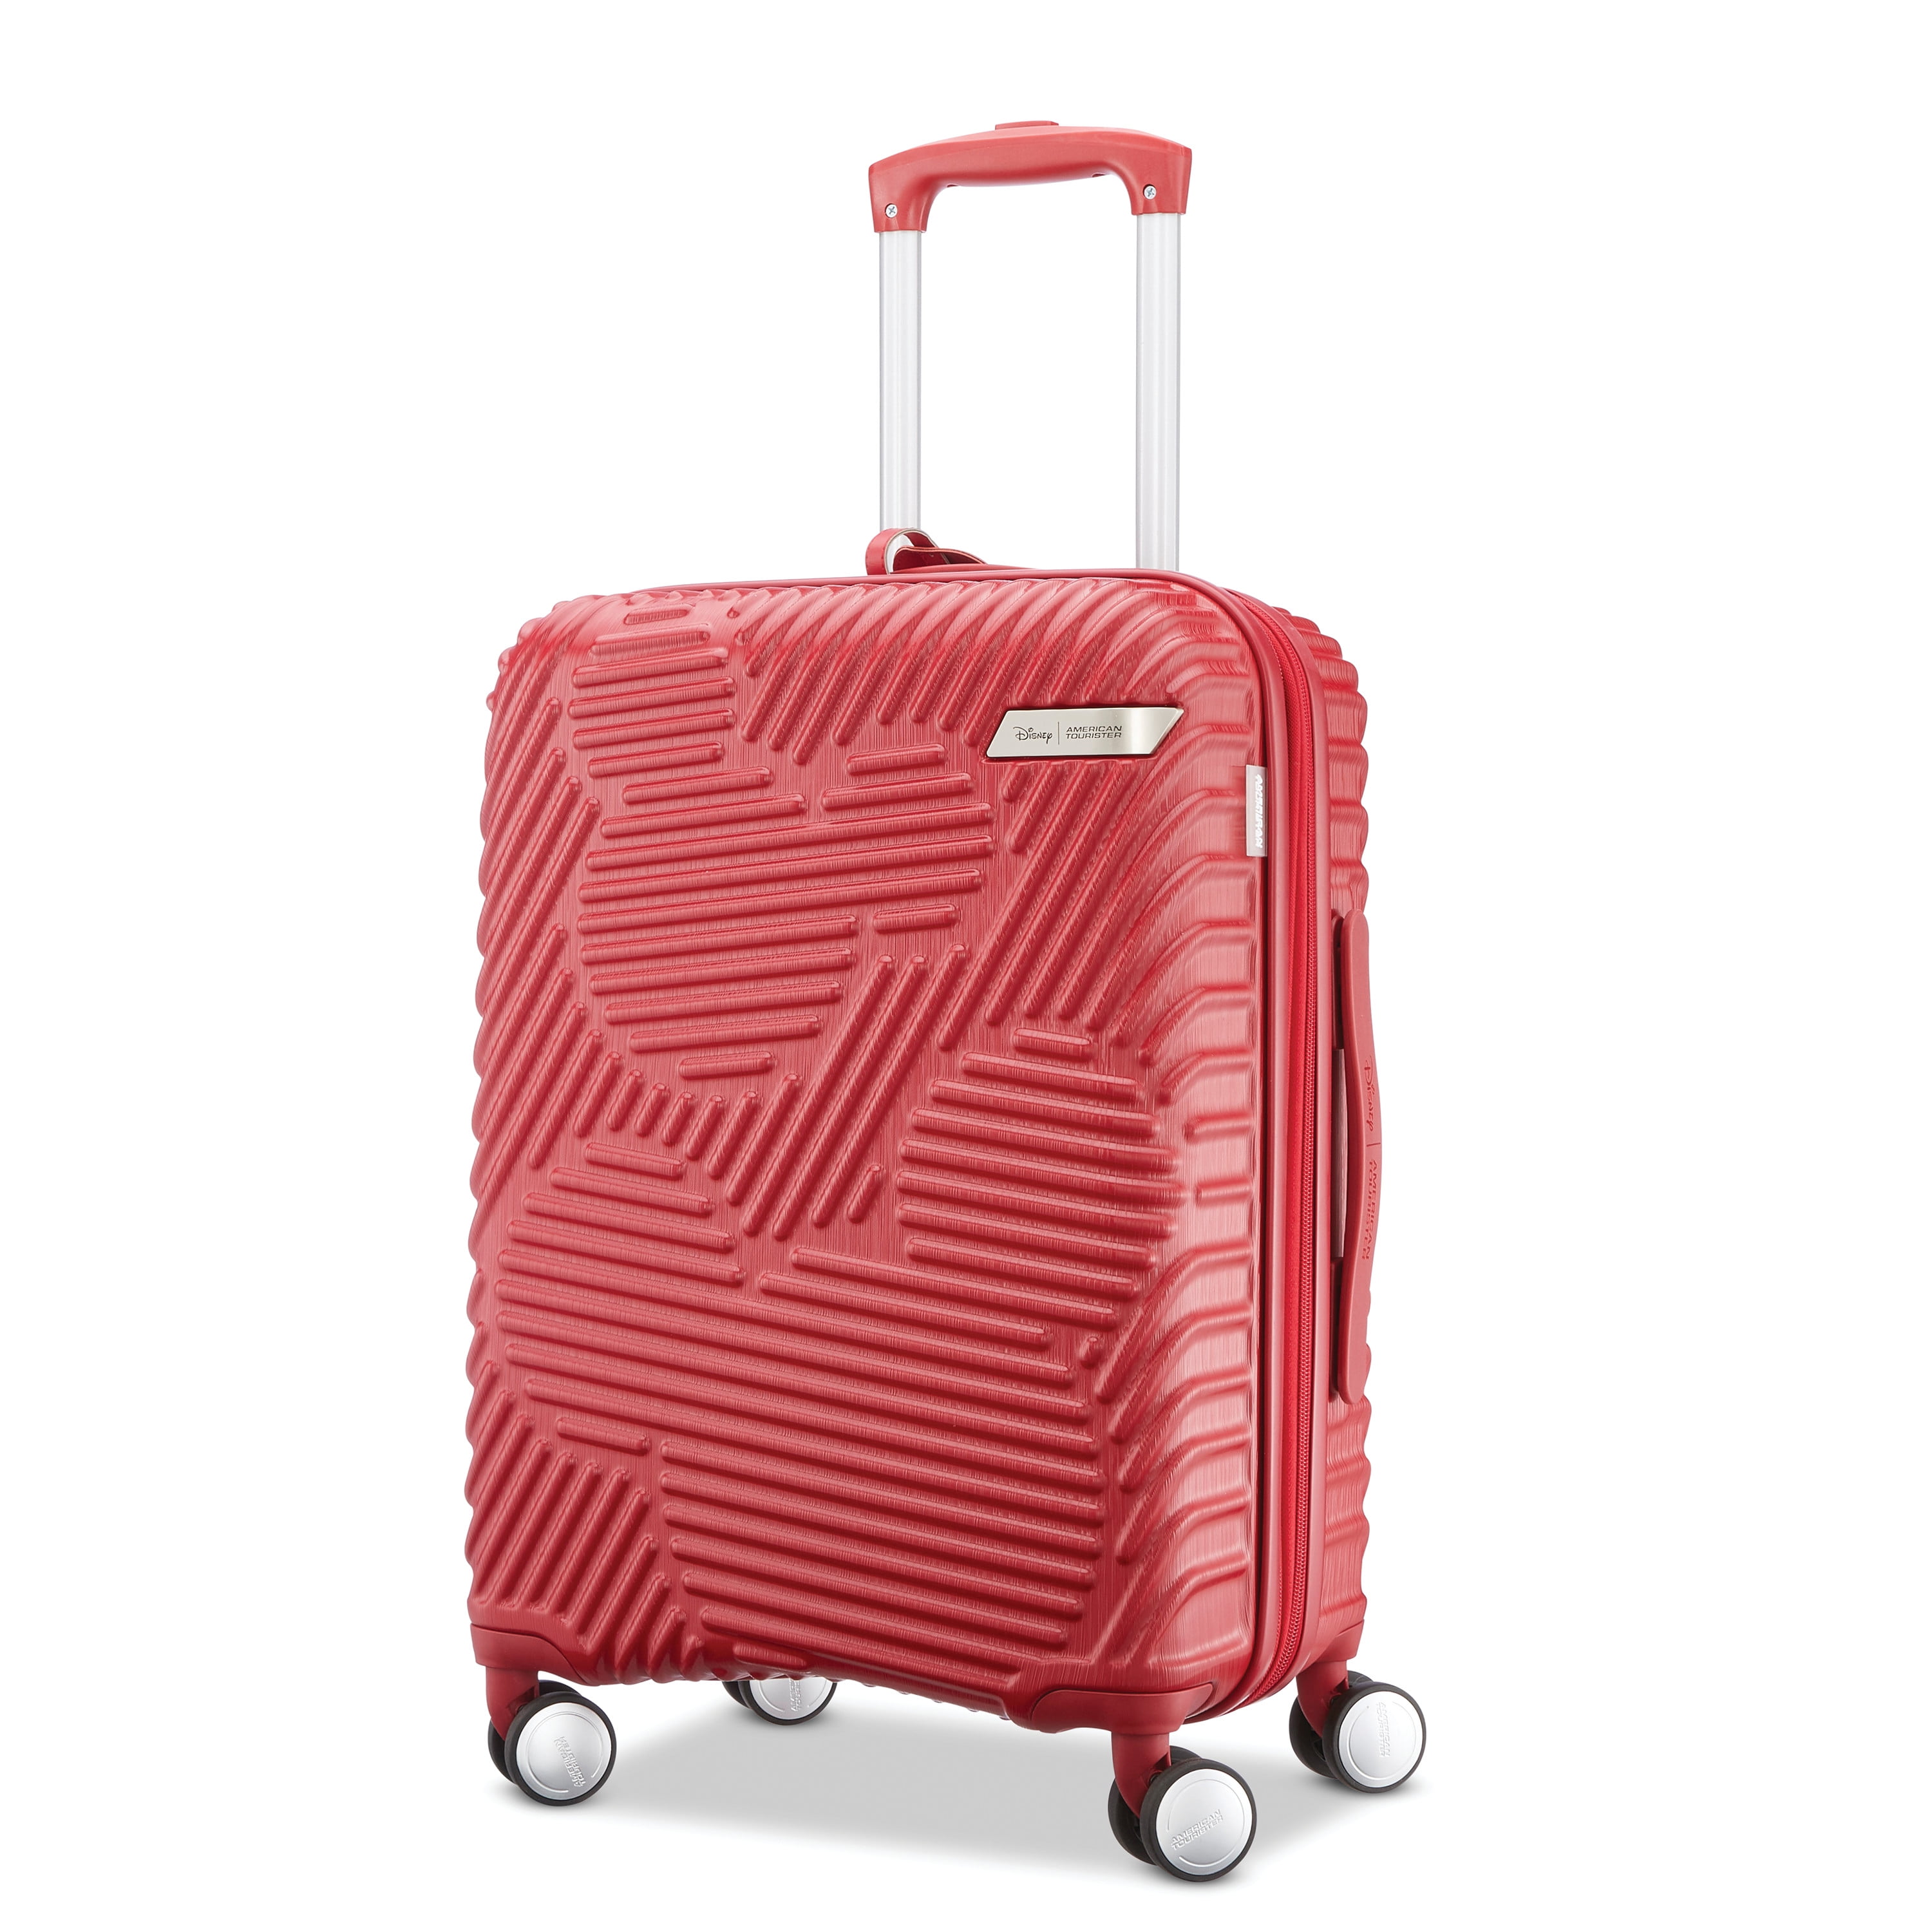 American Tourister Valise à roulettes Mickey Clouds Rose saumon